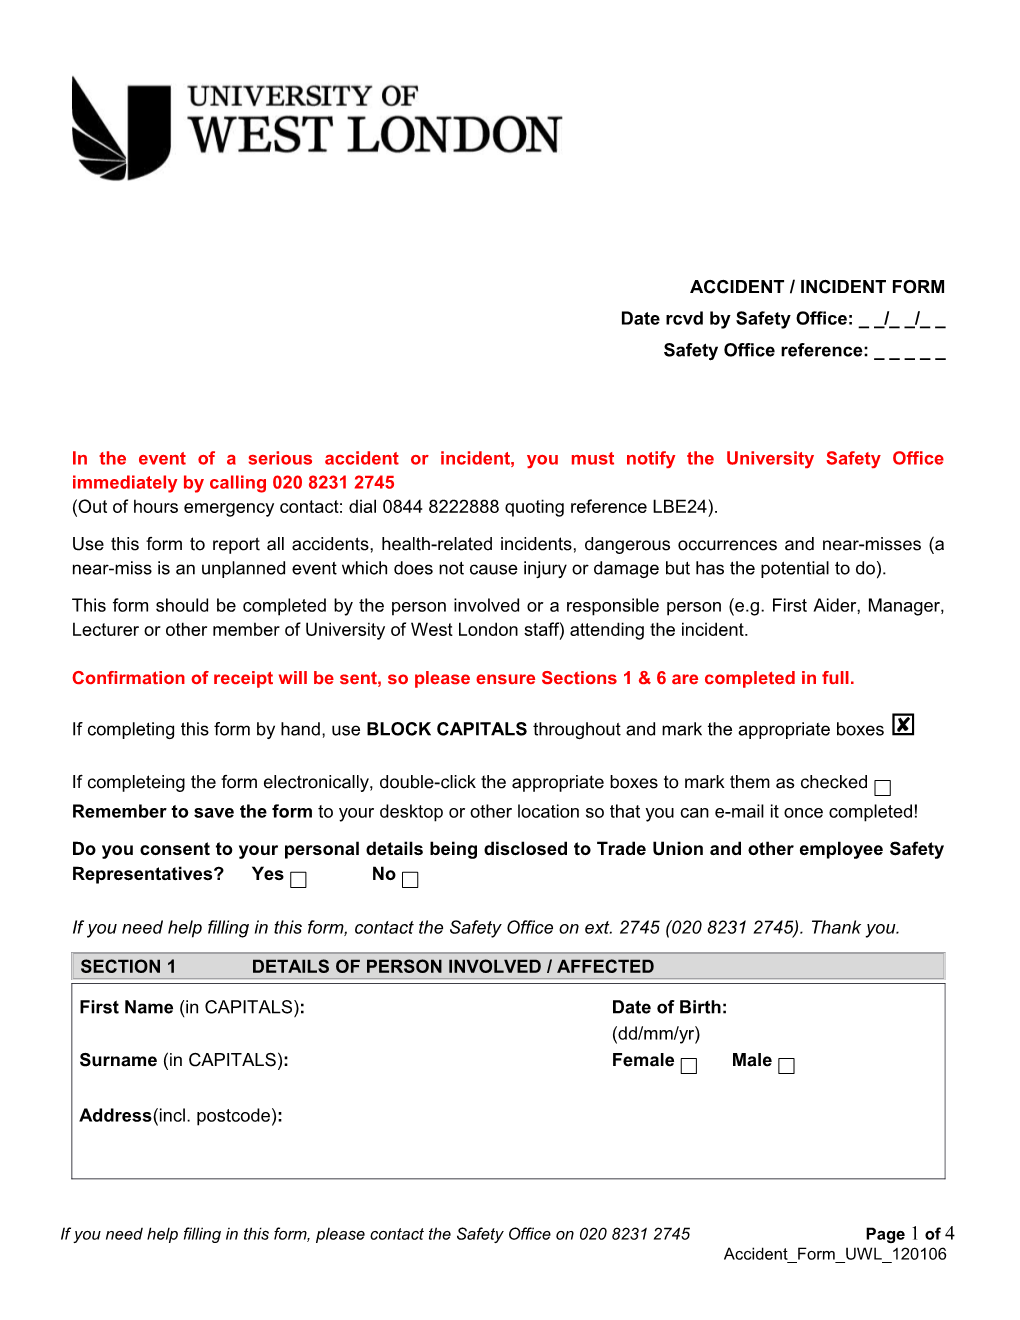 Accident / Incident Form